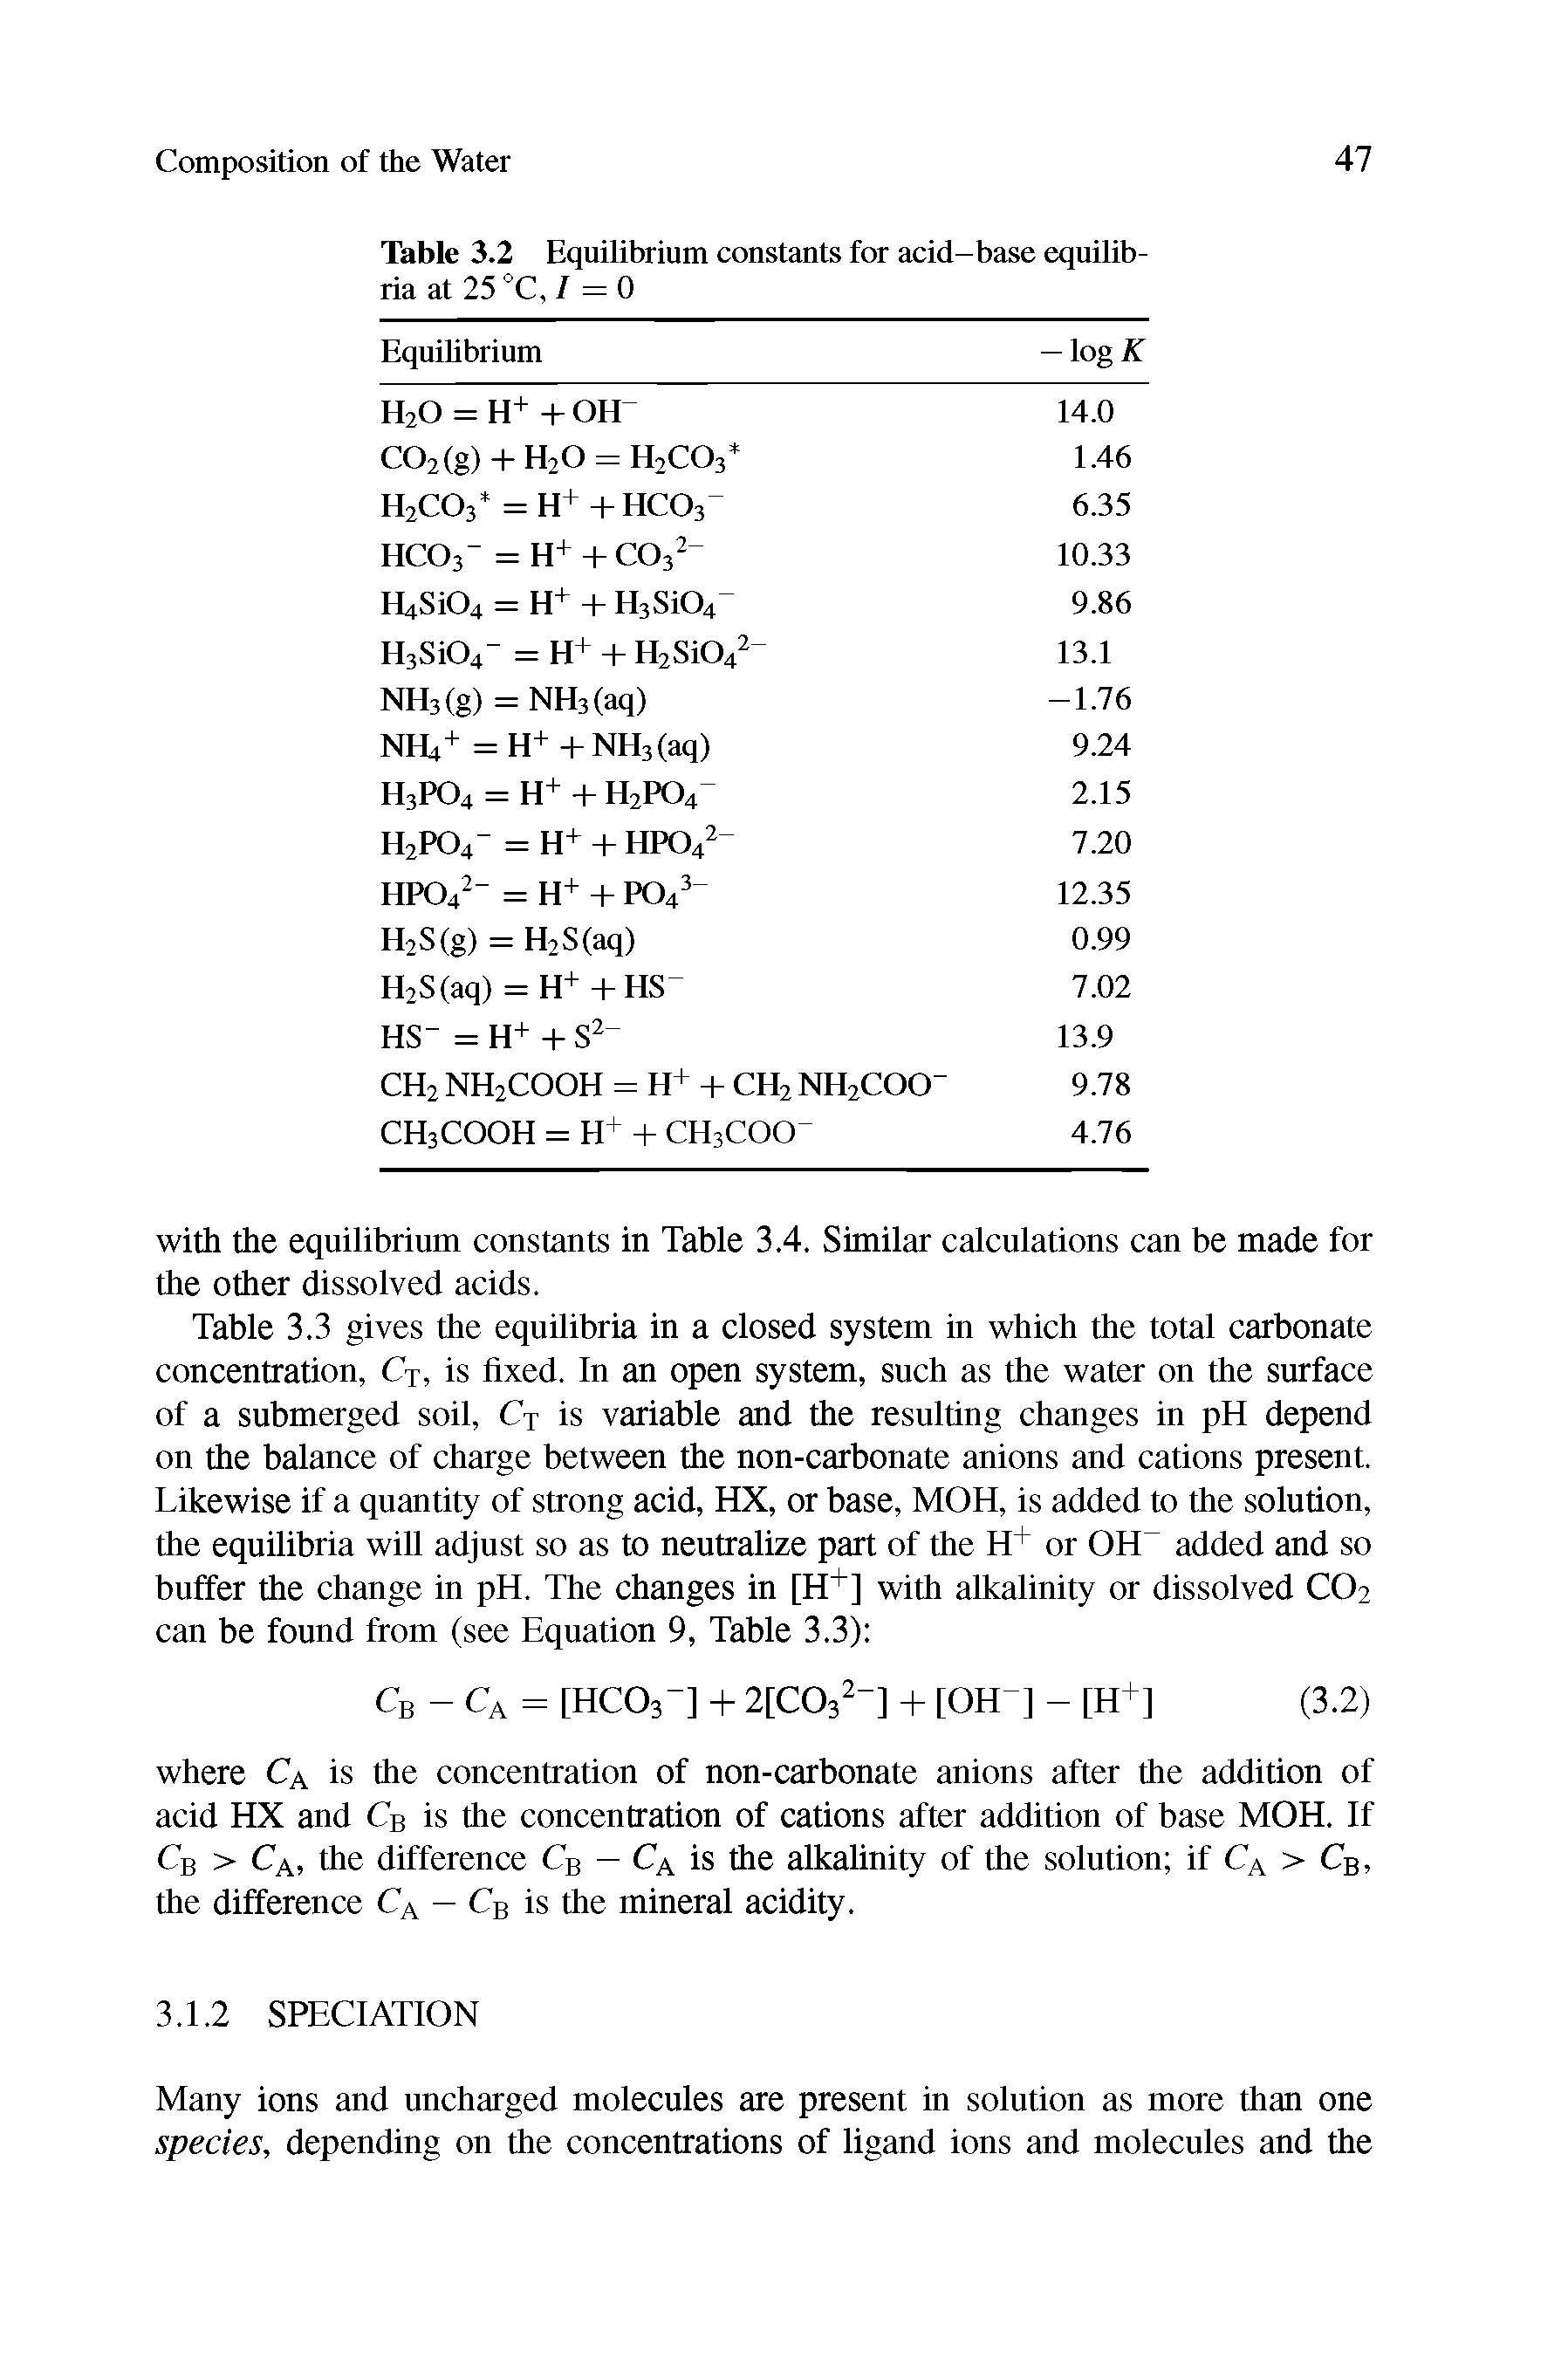 Table 3.2 Equilibrium constants for acid-base equilibria at 25 °C, / = 0...